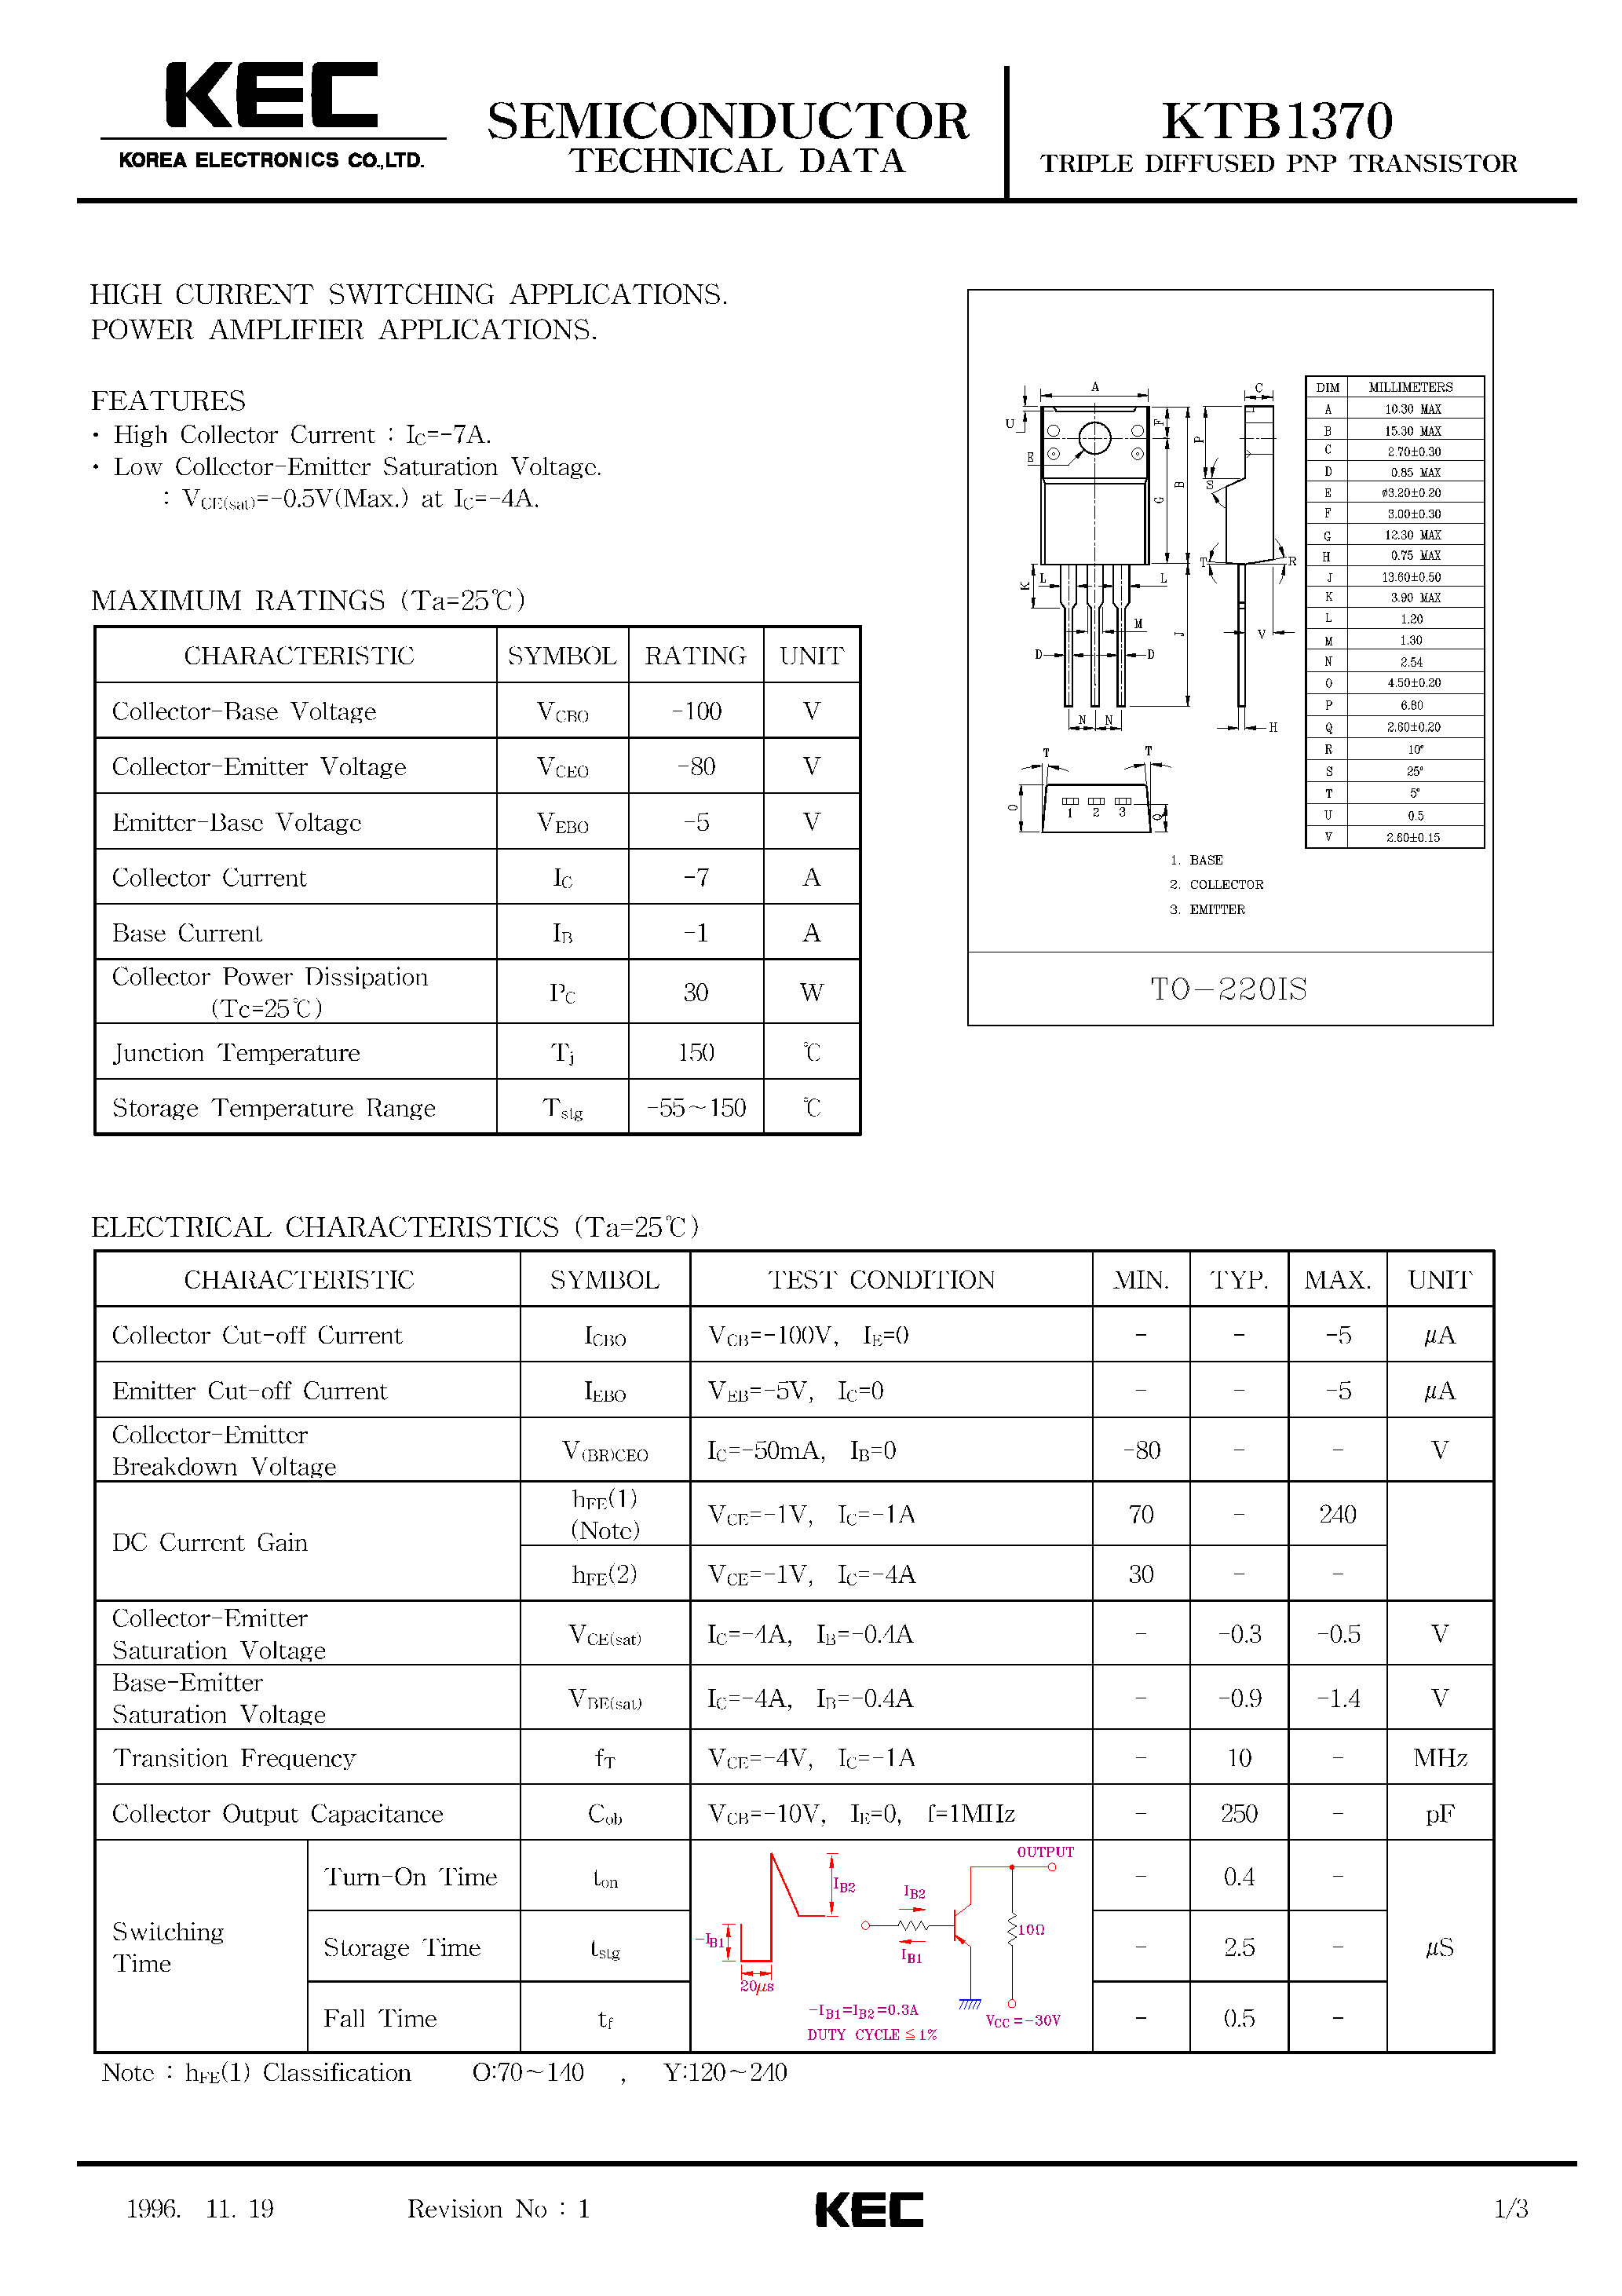 Datasheet KTB1370 - TRIPLE DIFFUSED PNP TRANSISTOR(HIGH CURRENT SWITCHING/ POWER AMPLIFIER) page 1